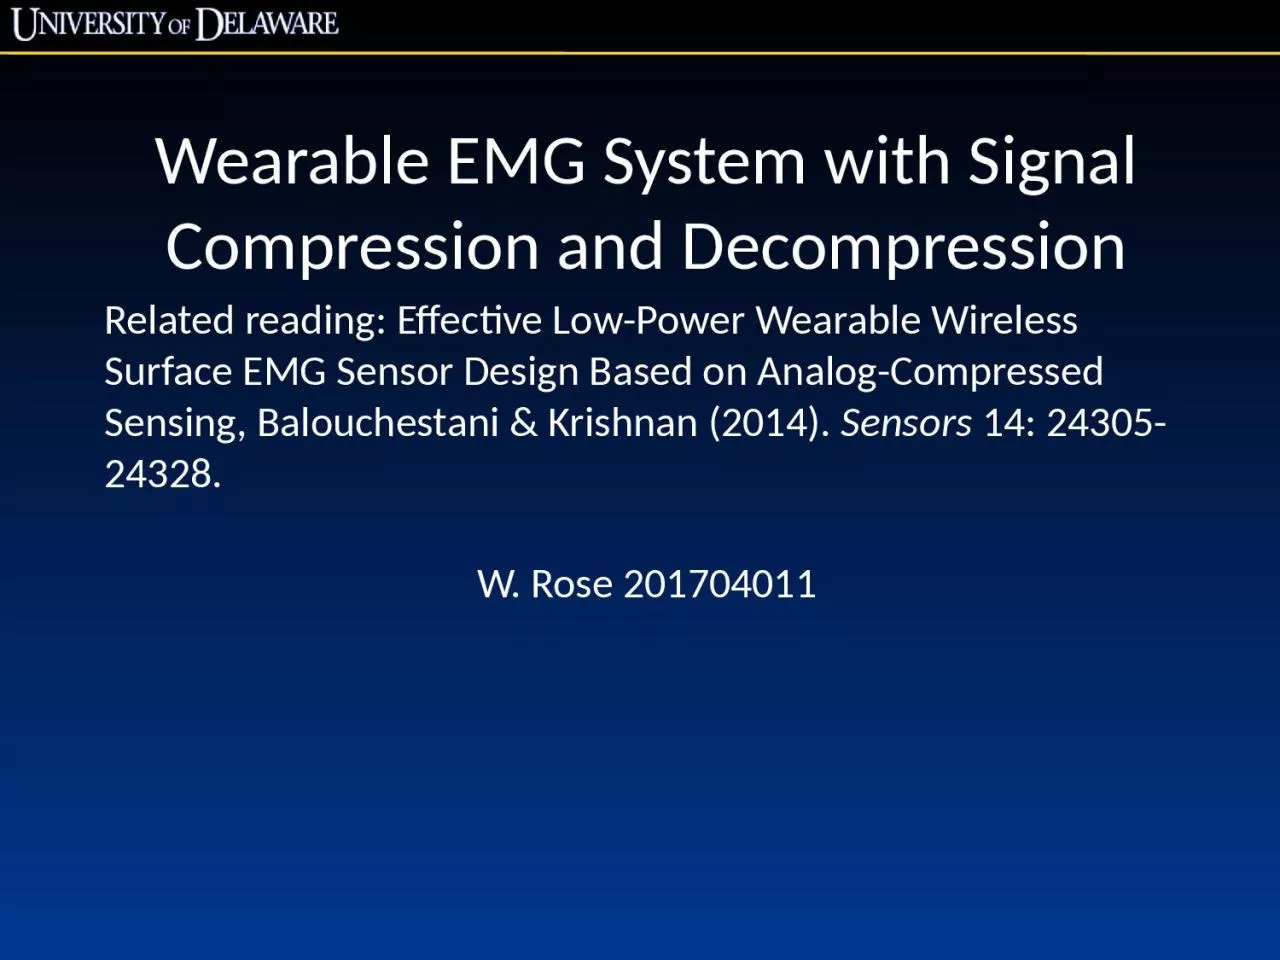 Wearable EMG System with Signal Compression and Decompression